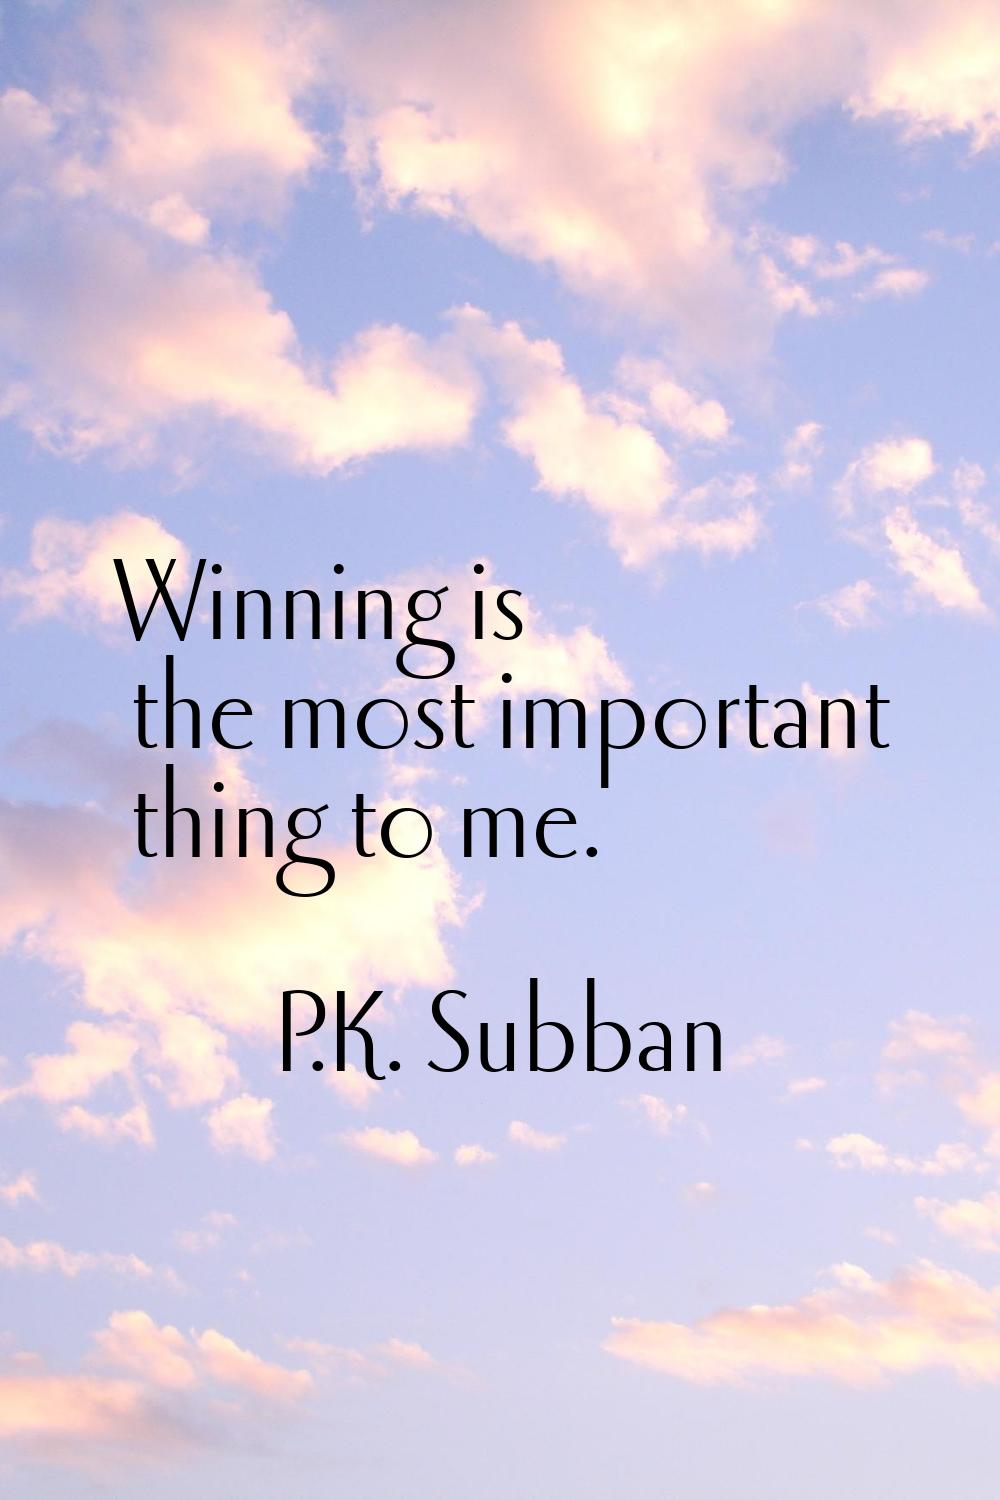 Winning is the most important thing to me.